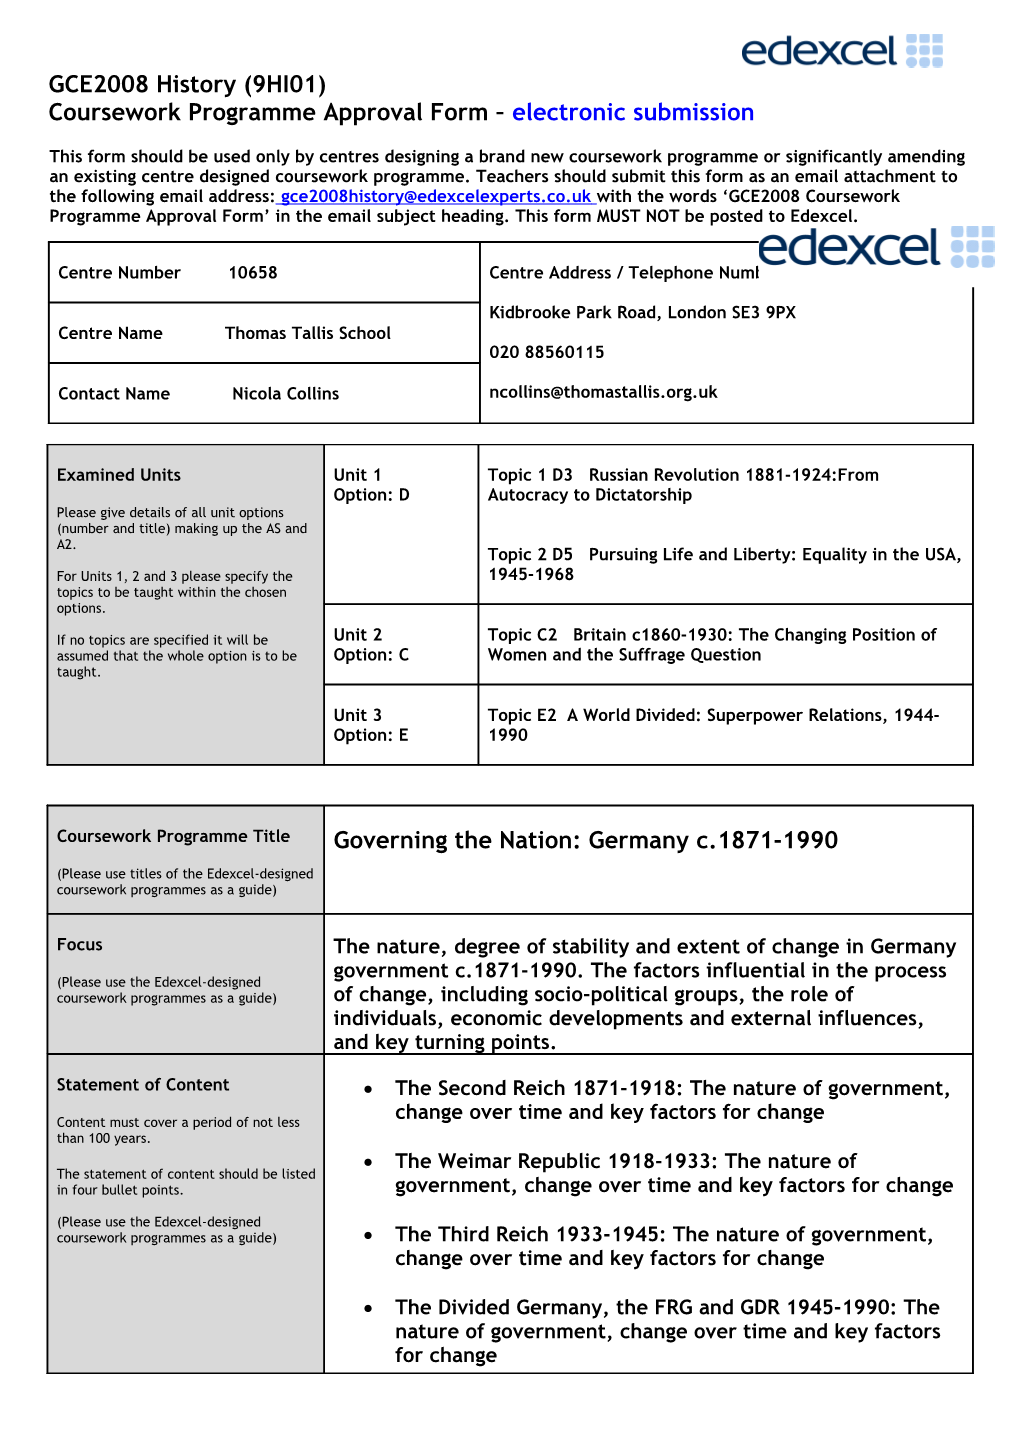 GCE History Coursework Programme Approval Form Page 1 of 2